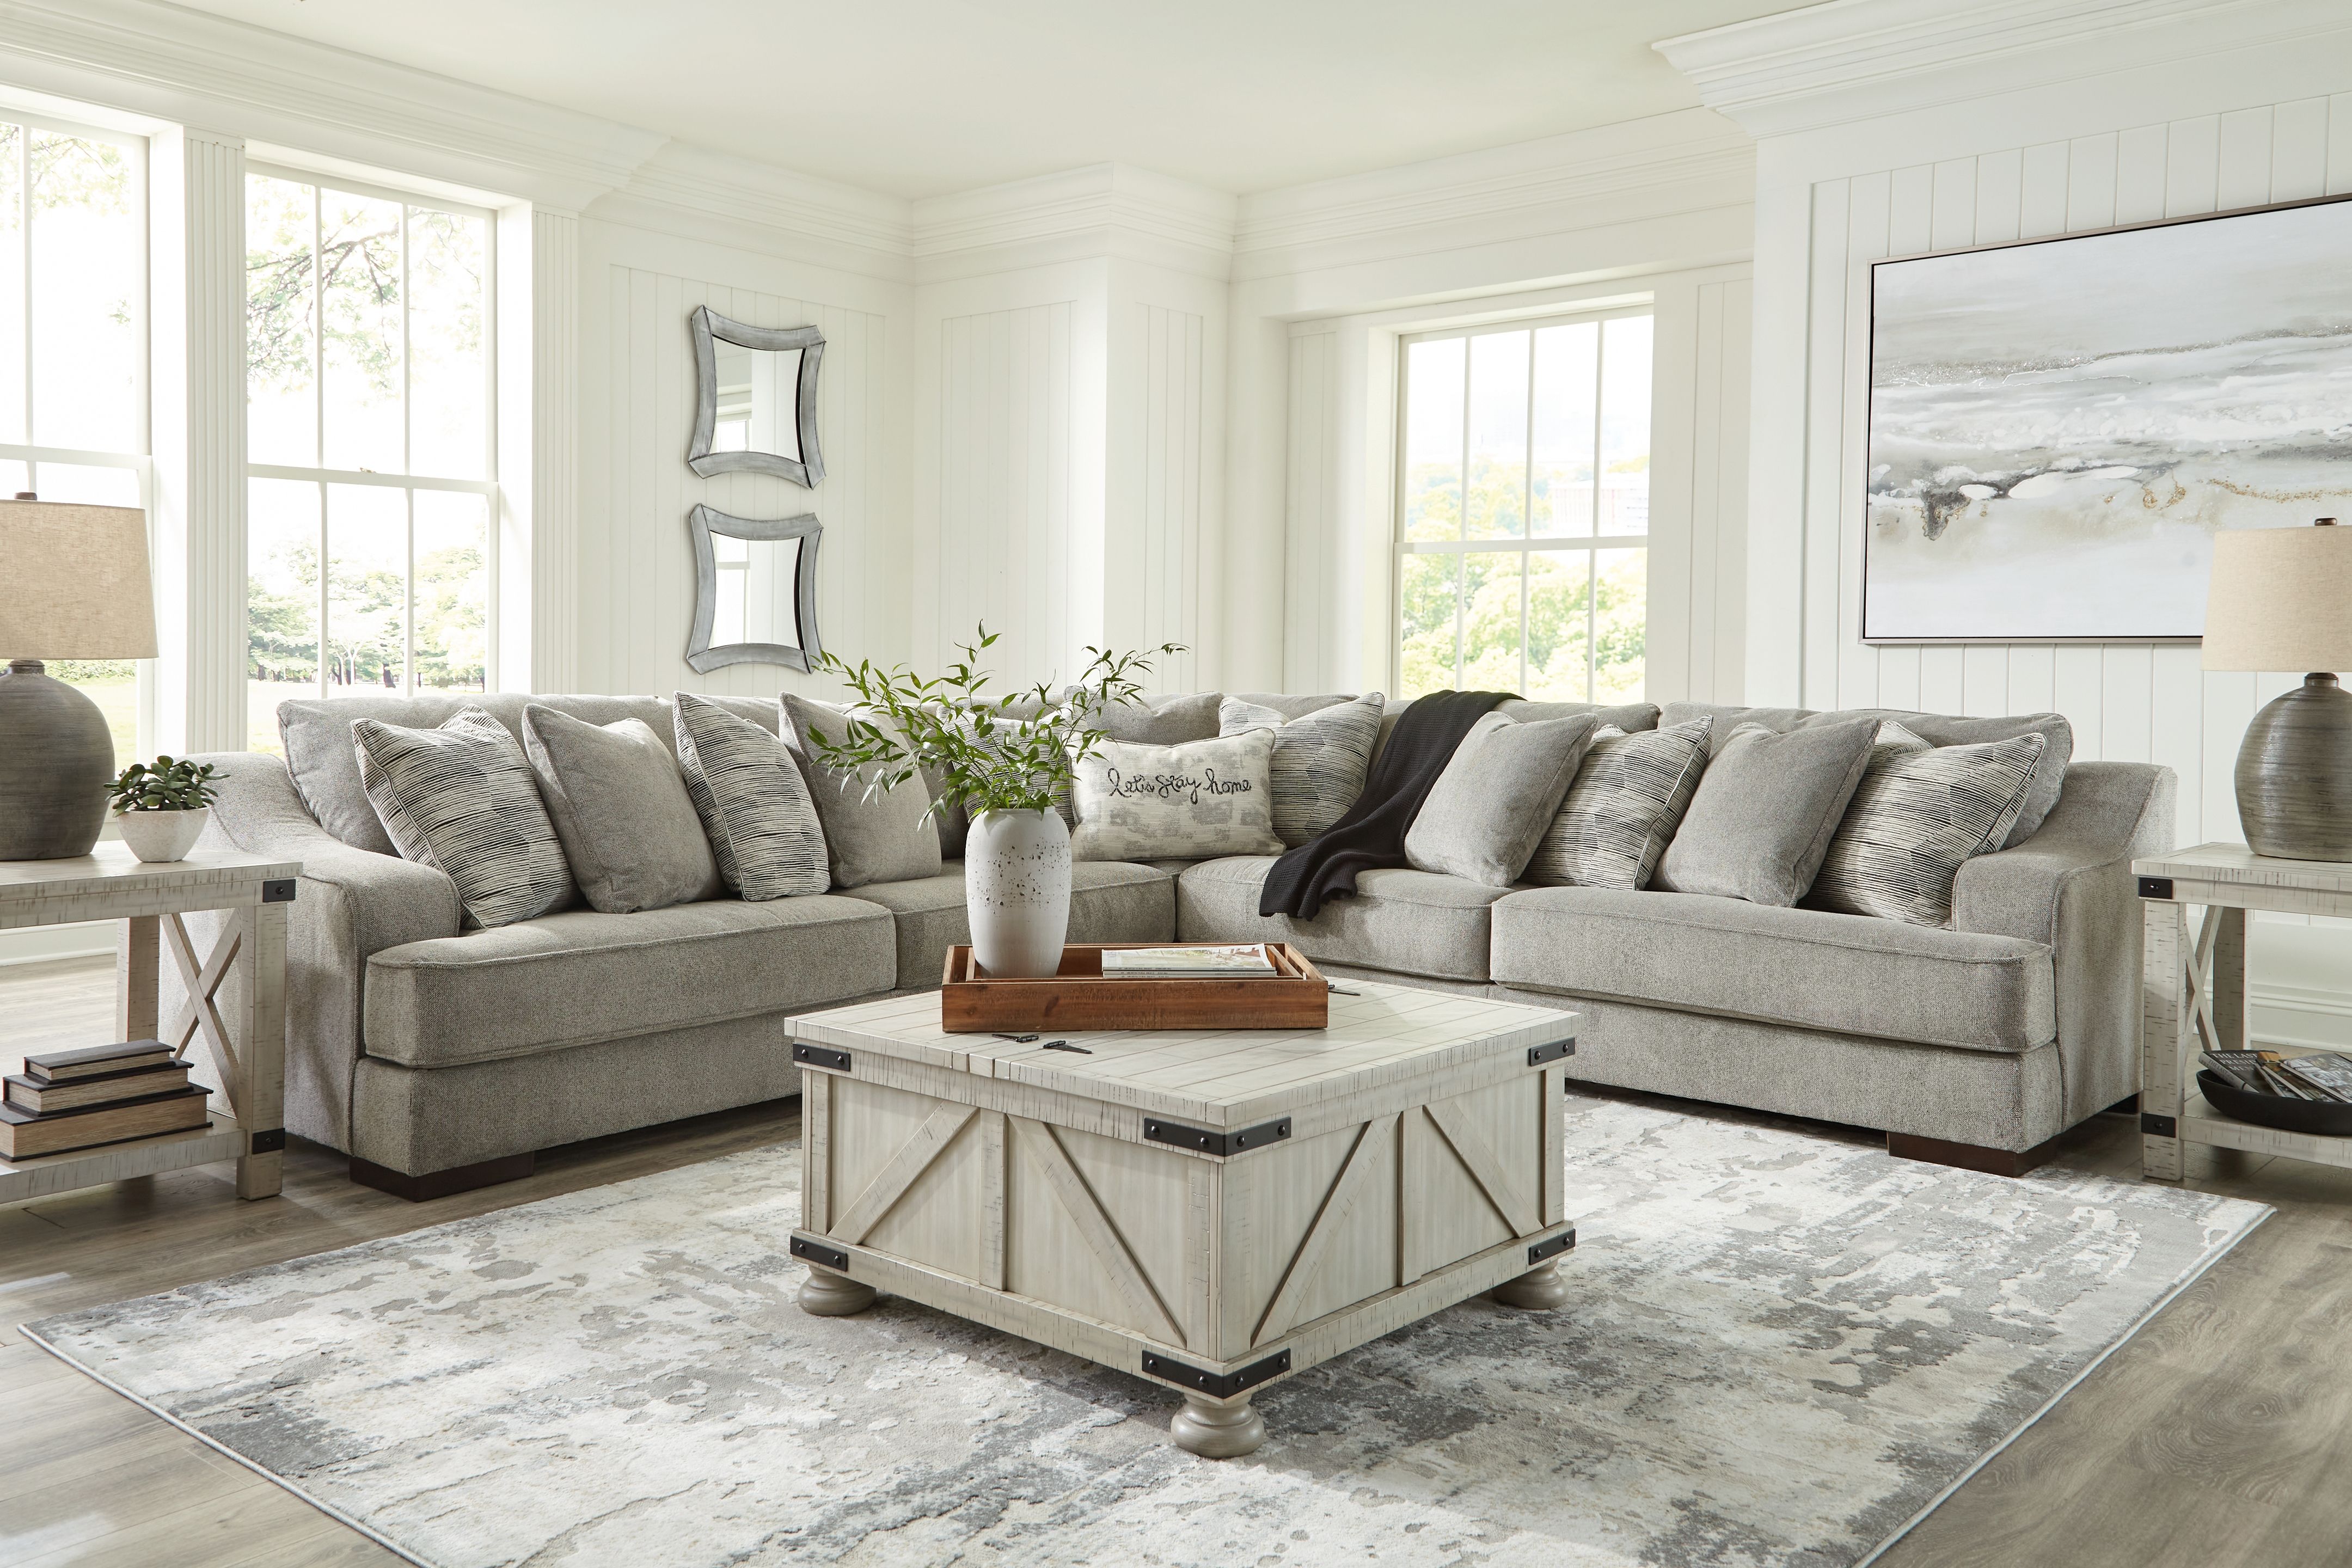 Bayless Sectional - Modern, Comfy, Smoke Gray Fabric-Stationary Sectionals-American Furniture Outlet